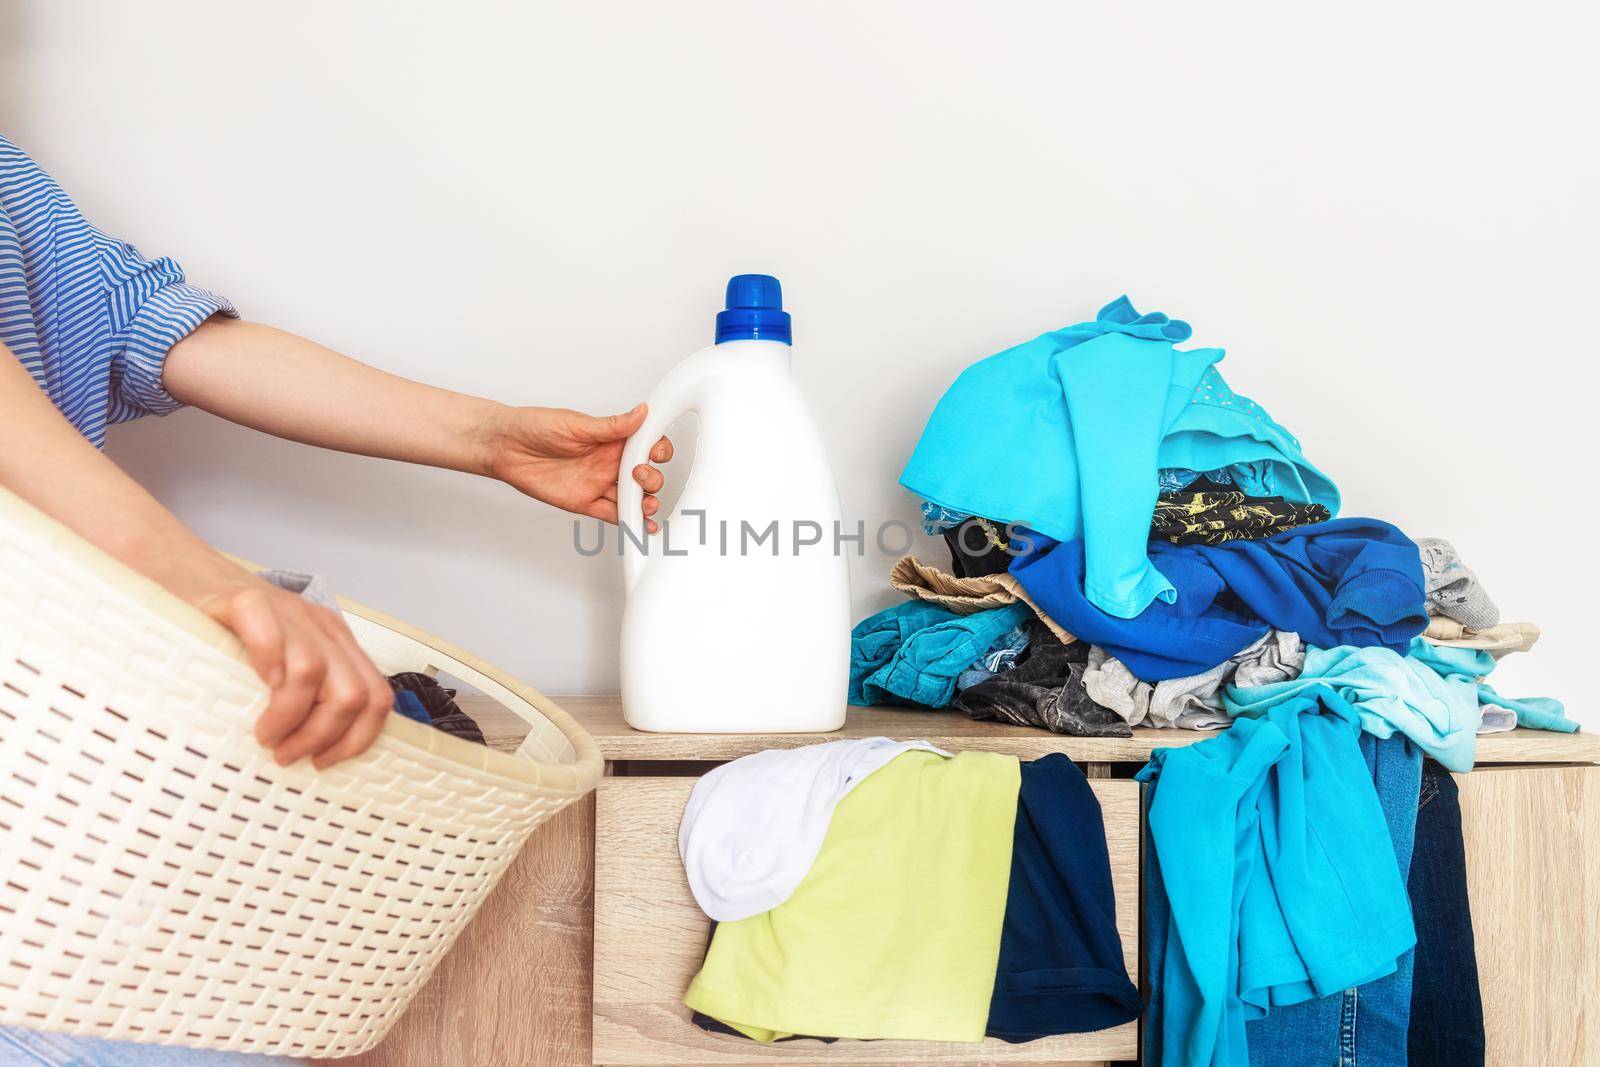 banner, copy paste background for design. The concept of washing, washing, detergent or liquid for cleaning and cleaning the room. Label mockup, logo on white bottle. Empty white wall on the right